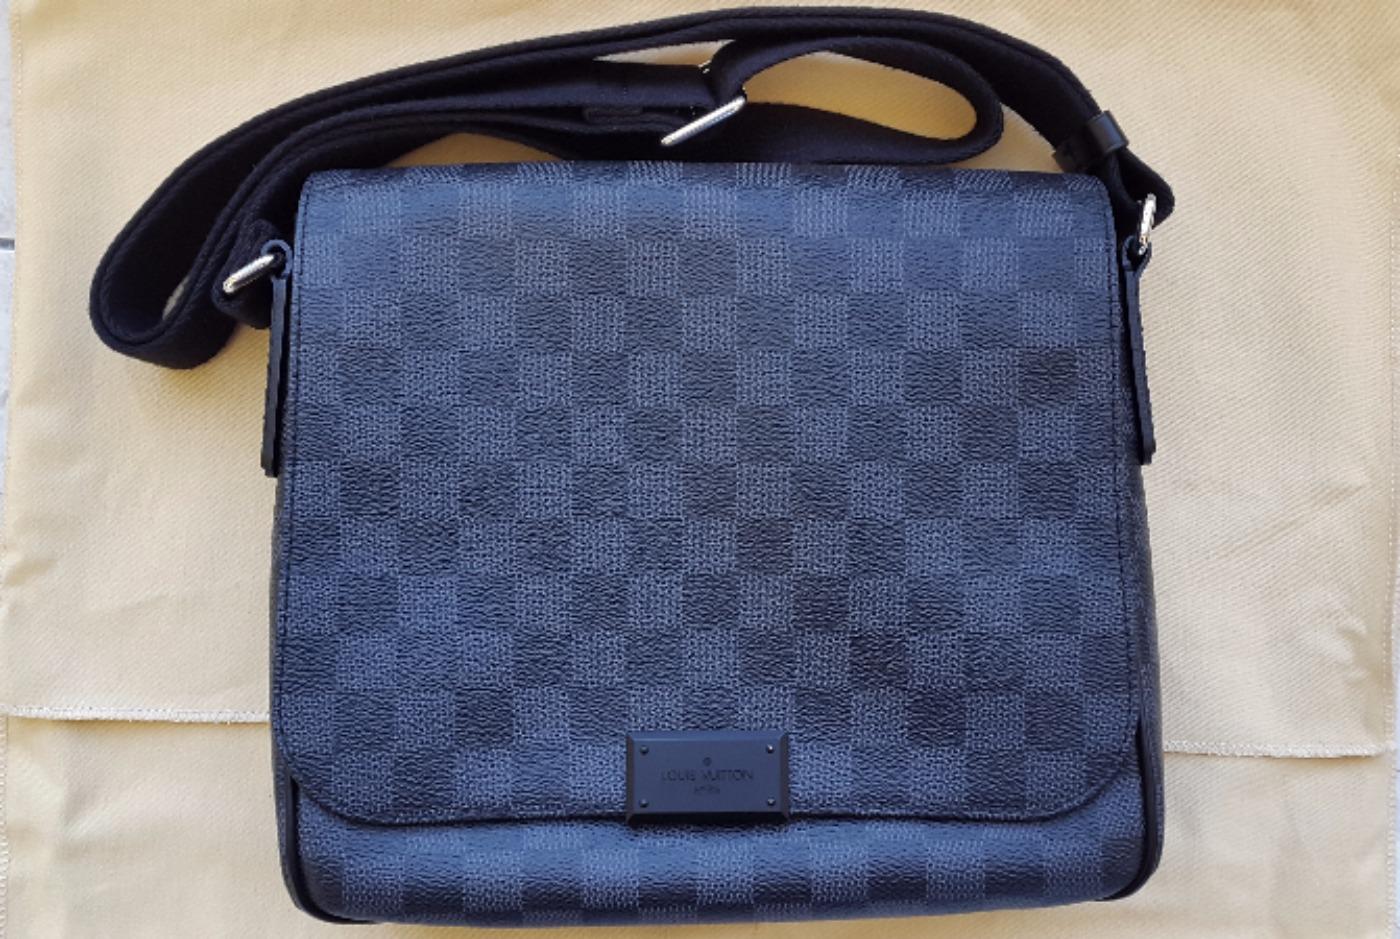 Sacoche Louis Vuitton Damier Noir | Confederated Tribes of the Umatilla Indian Reservation